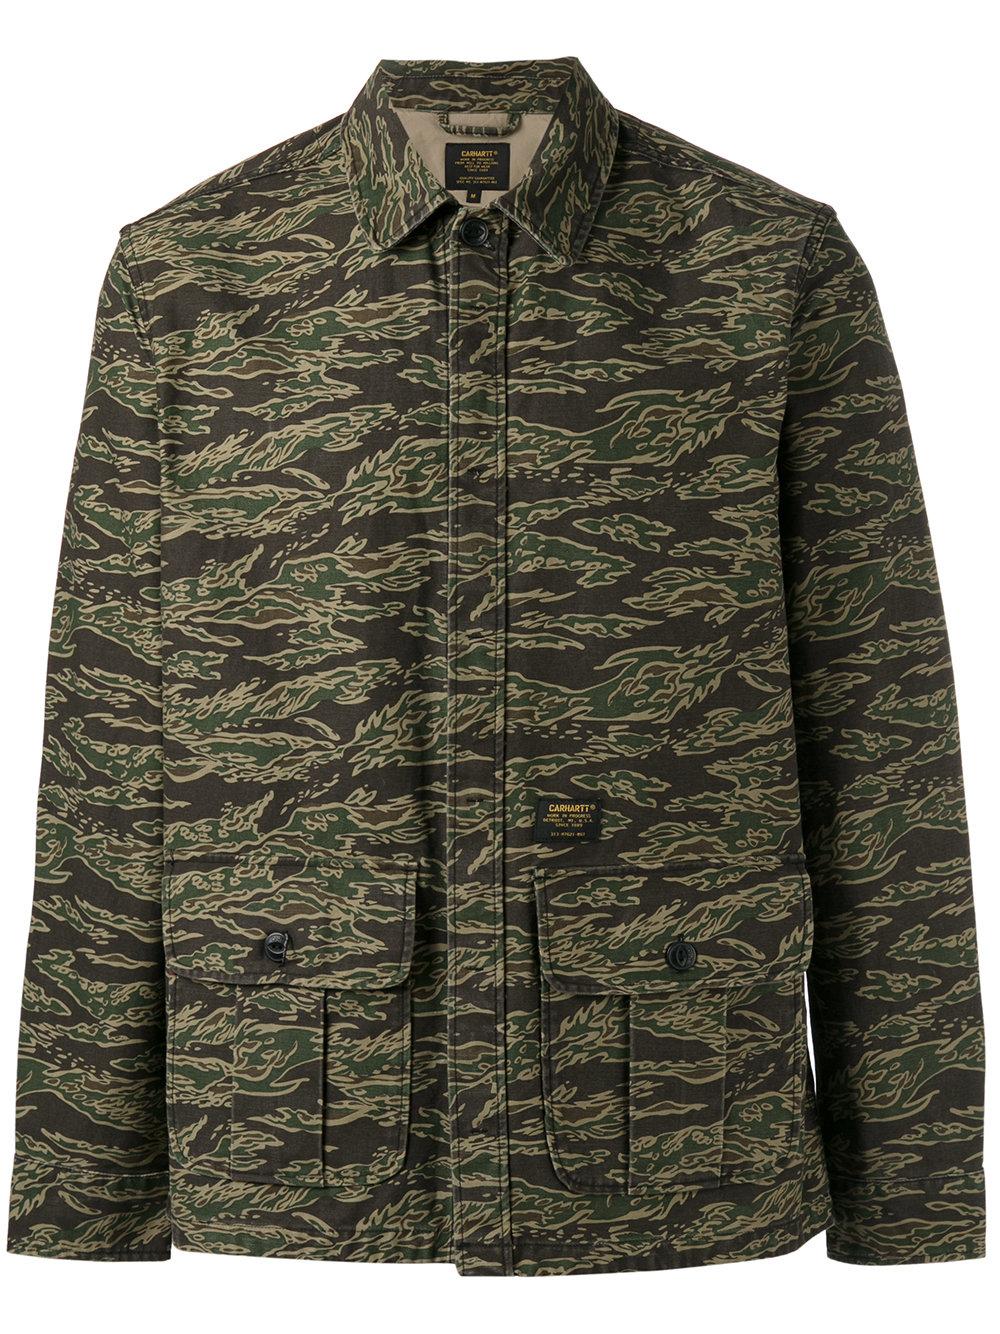 Carhartt Camouflage Jacket in Green for Men - Lyst